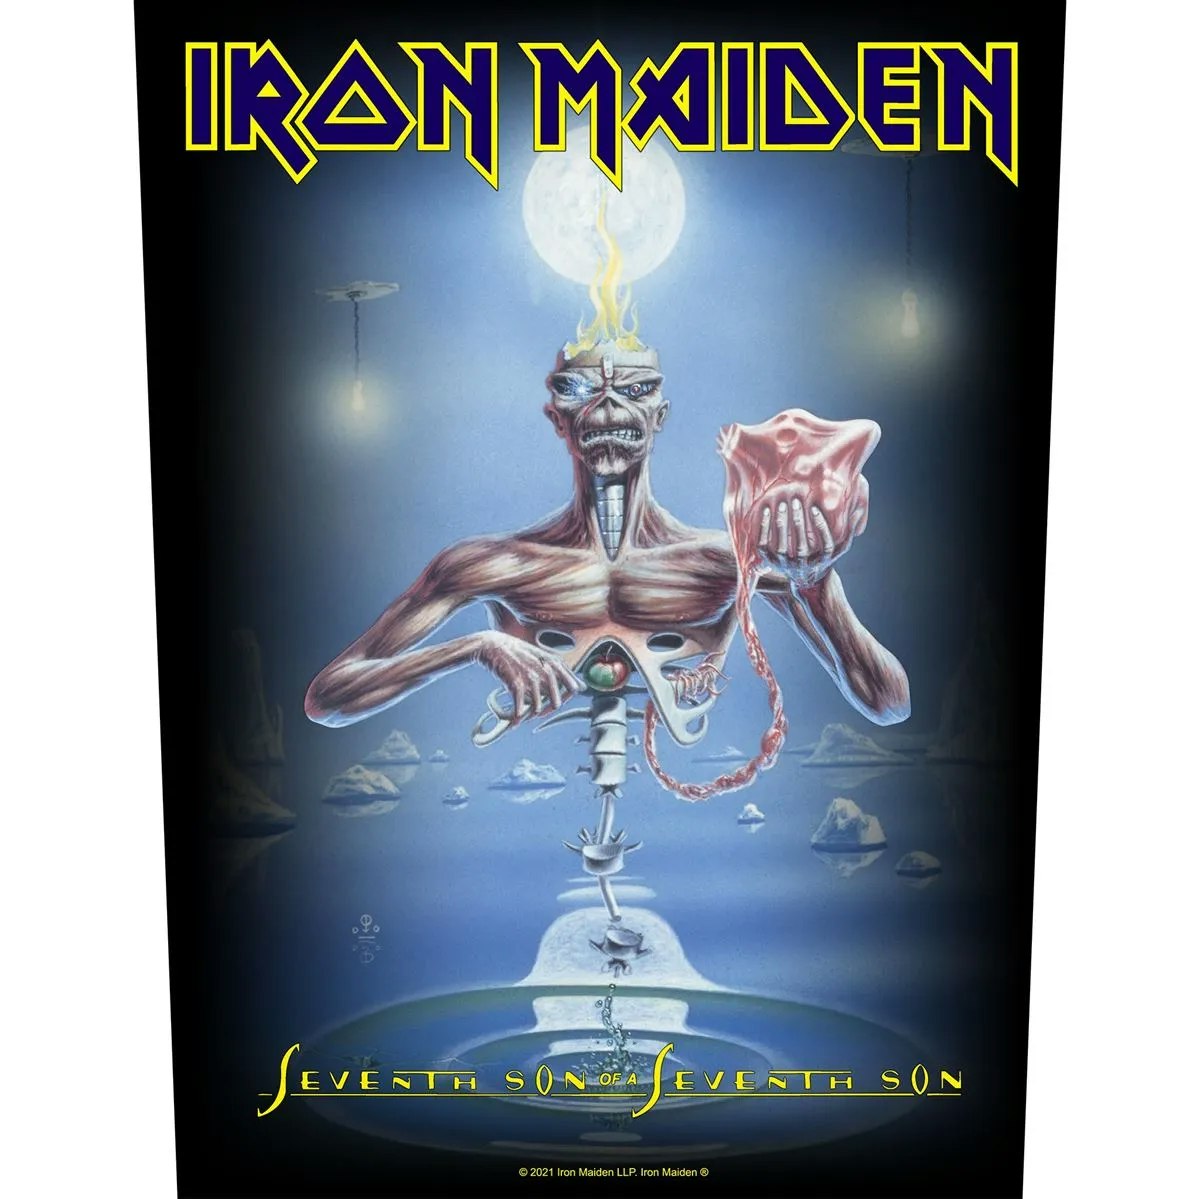 IRON MAIDEN - SEVENTH SON Backpatch